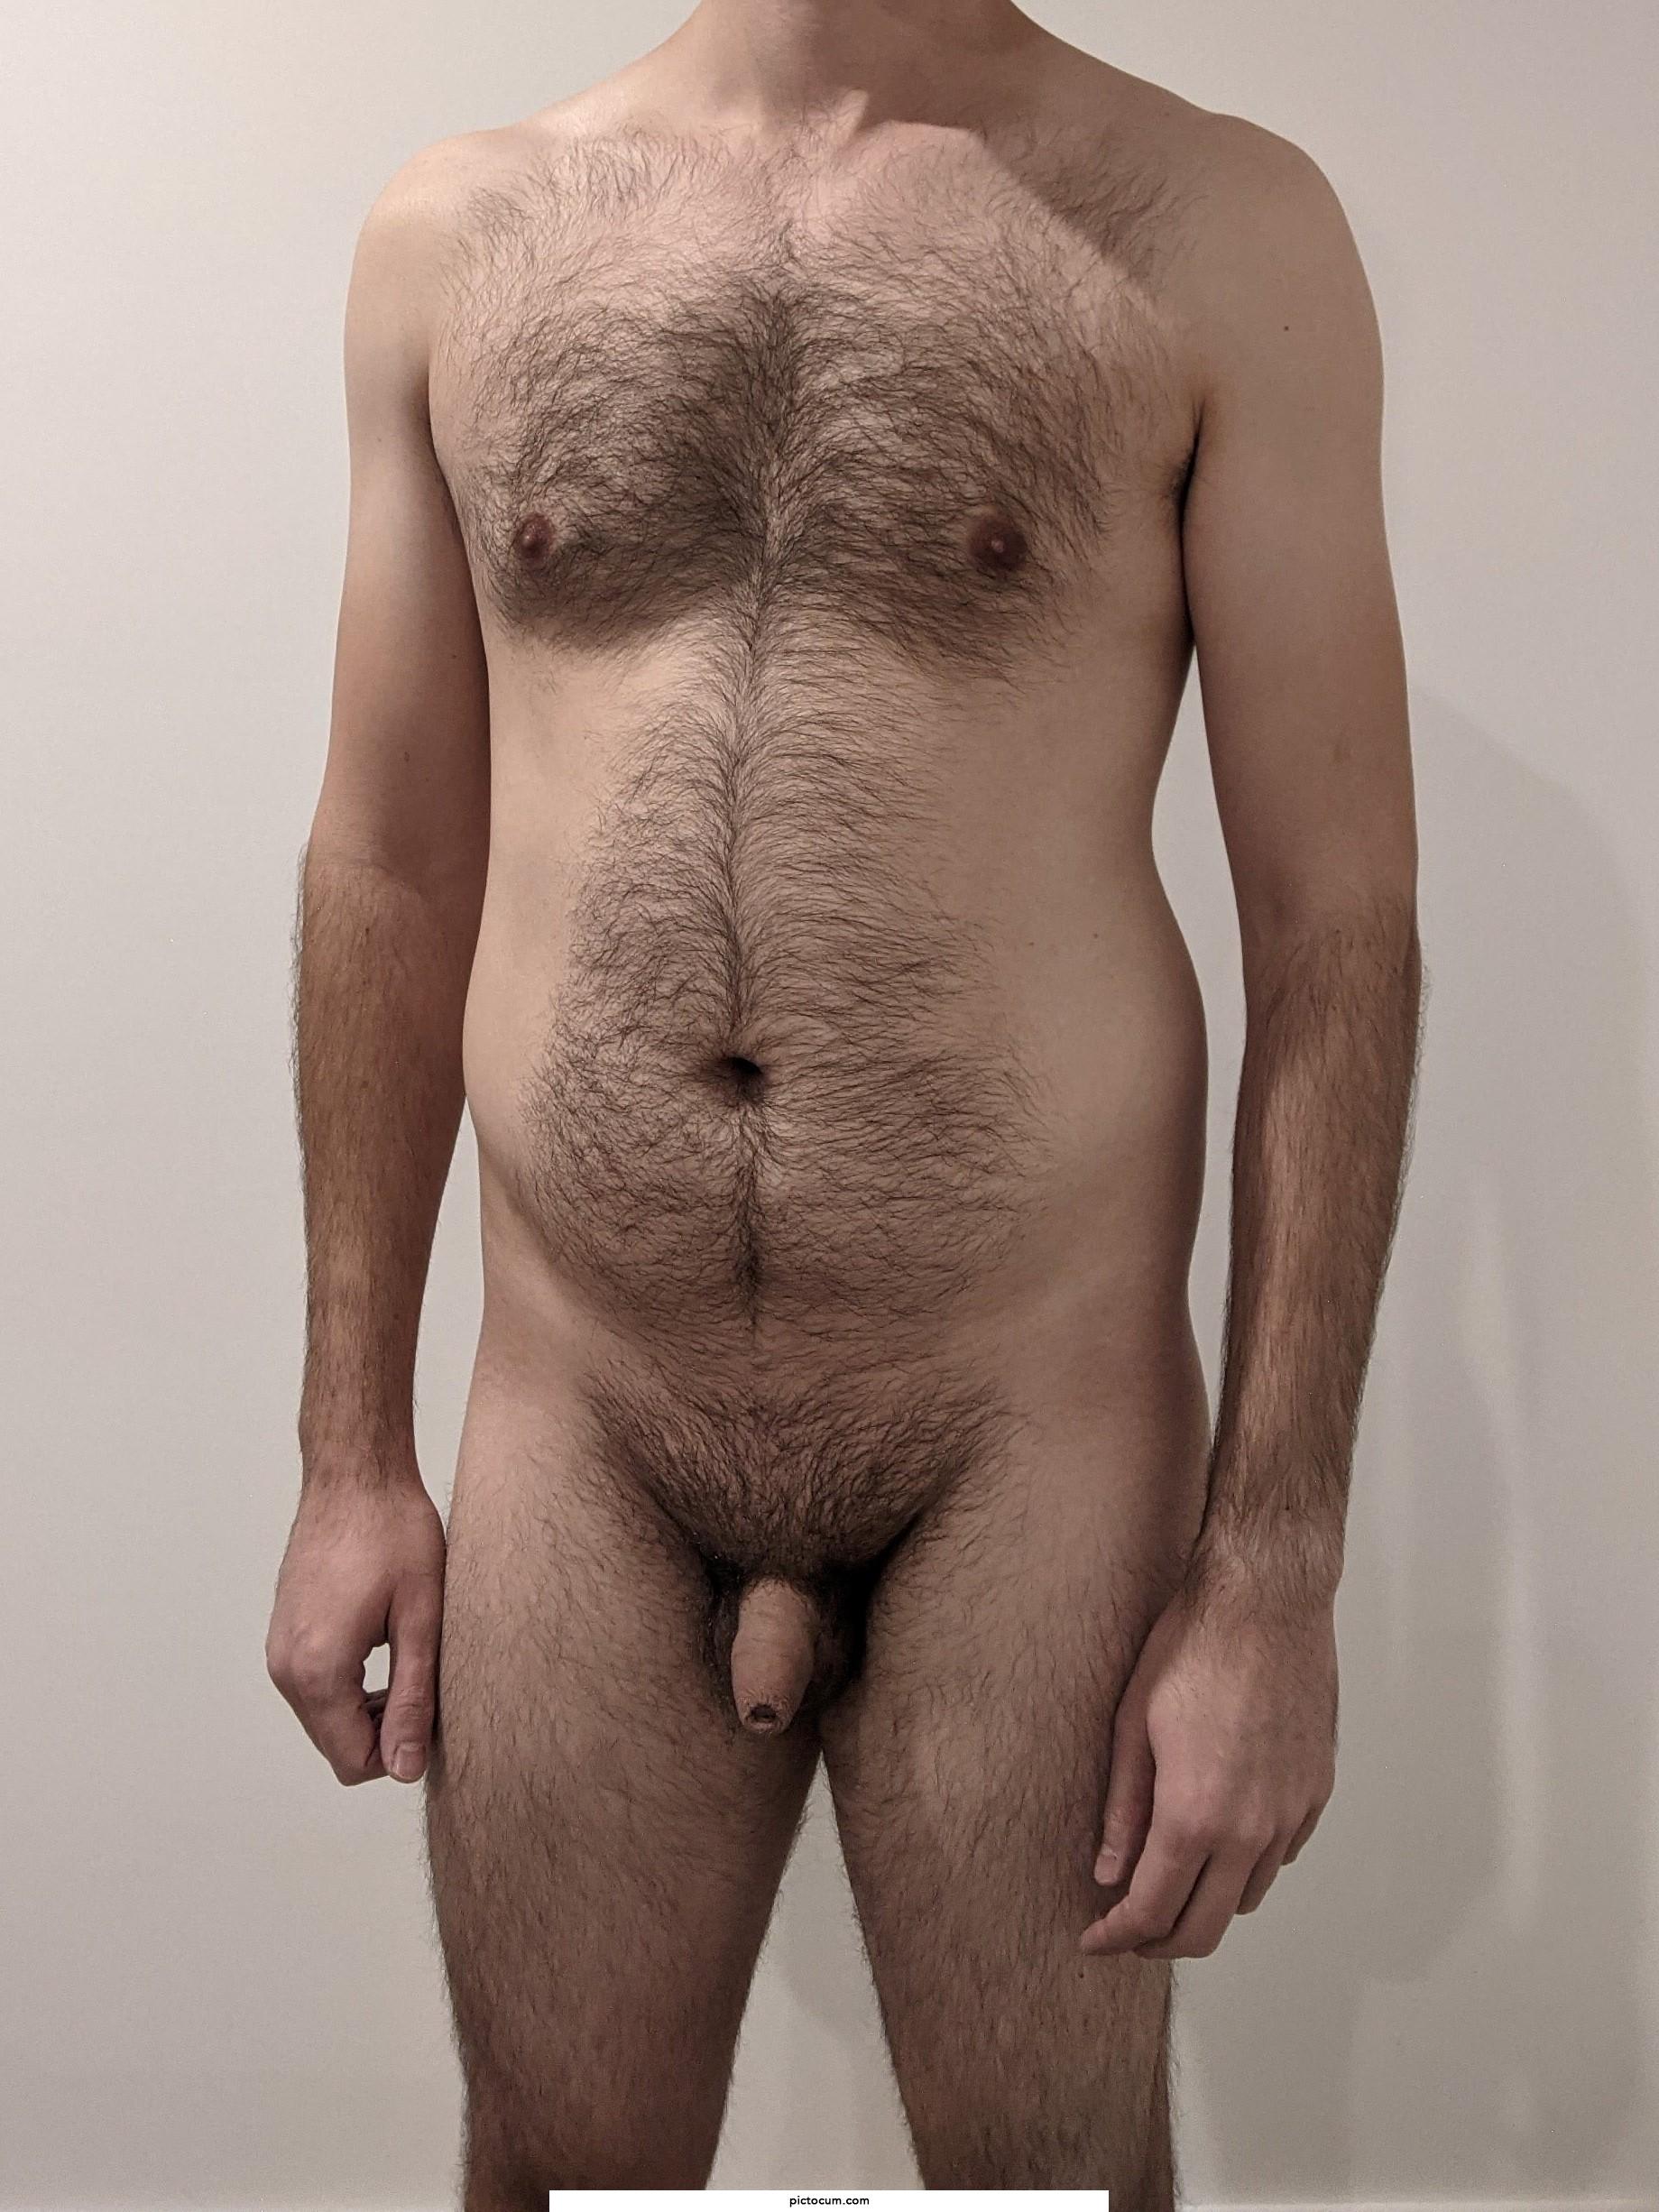 M, 30s. Lots of hair, a small penis and all. Since they never show bodies like mine in movies or on TV... here is mine :)